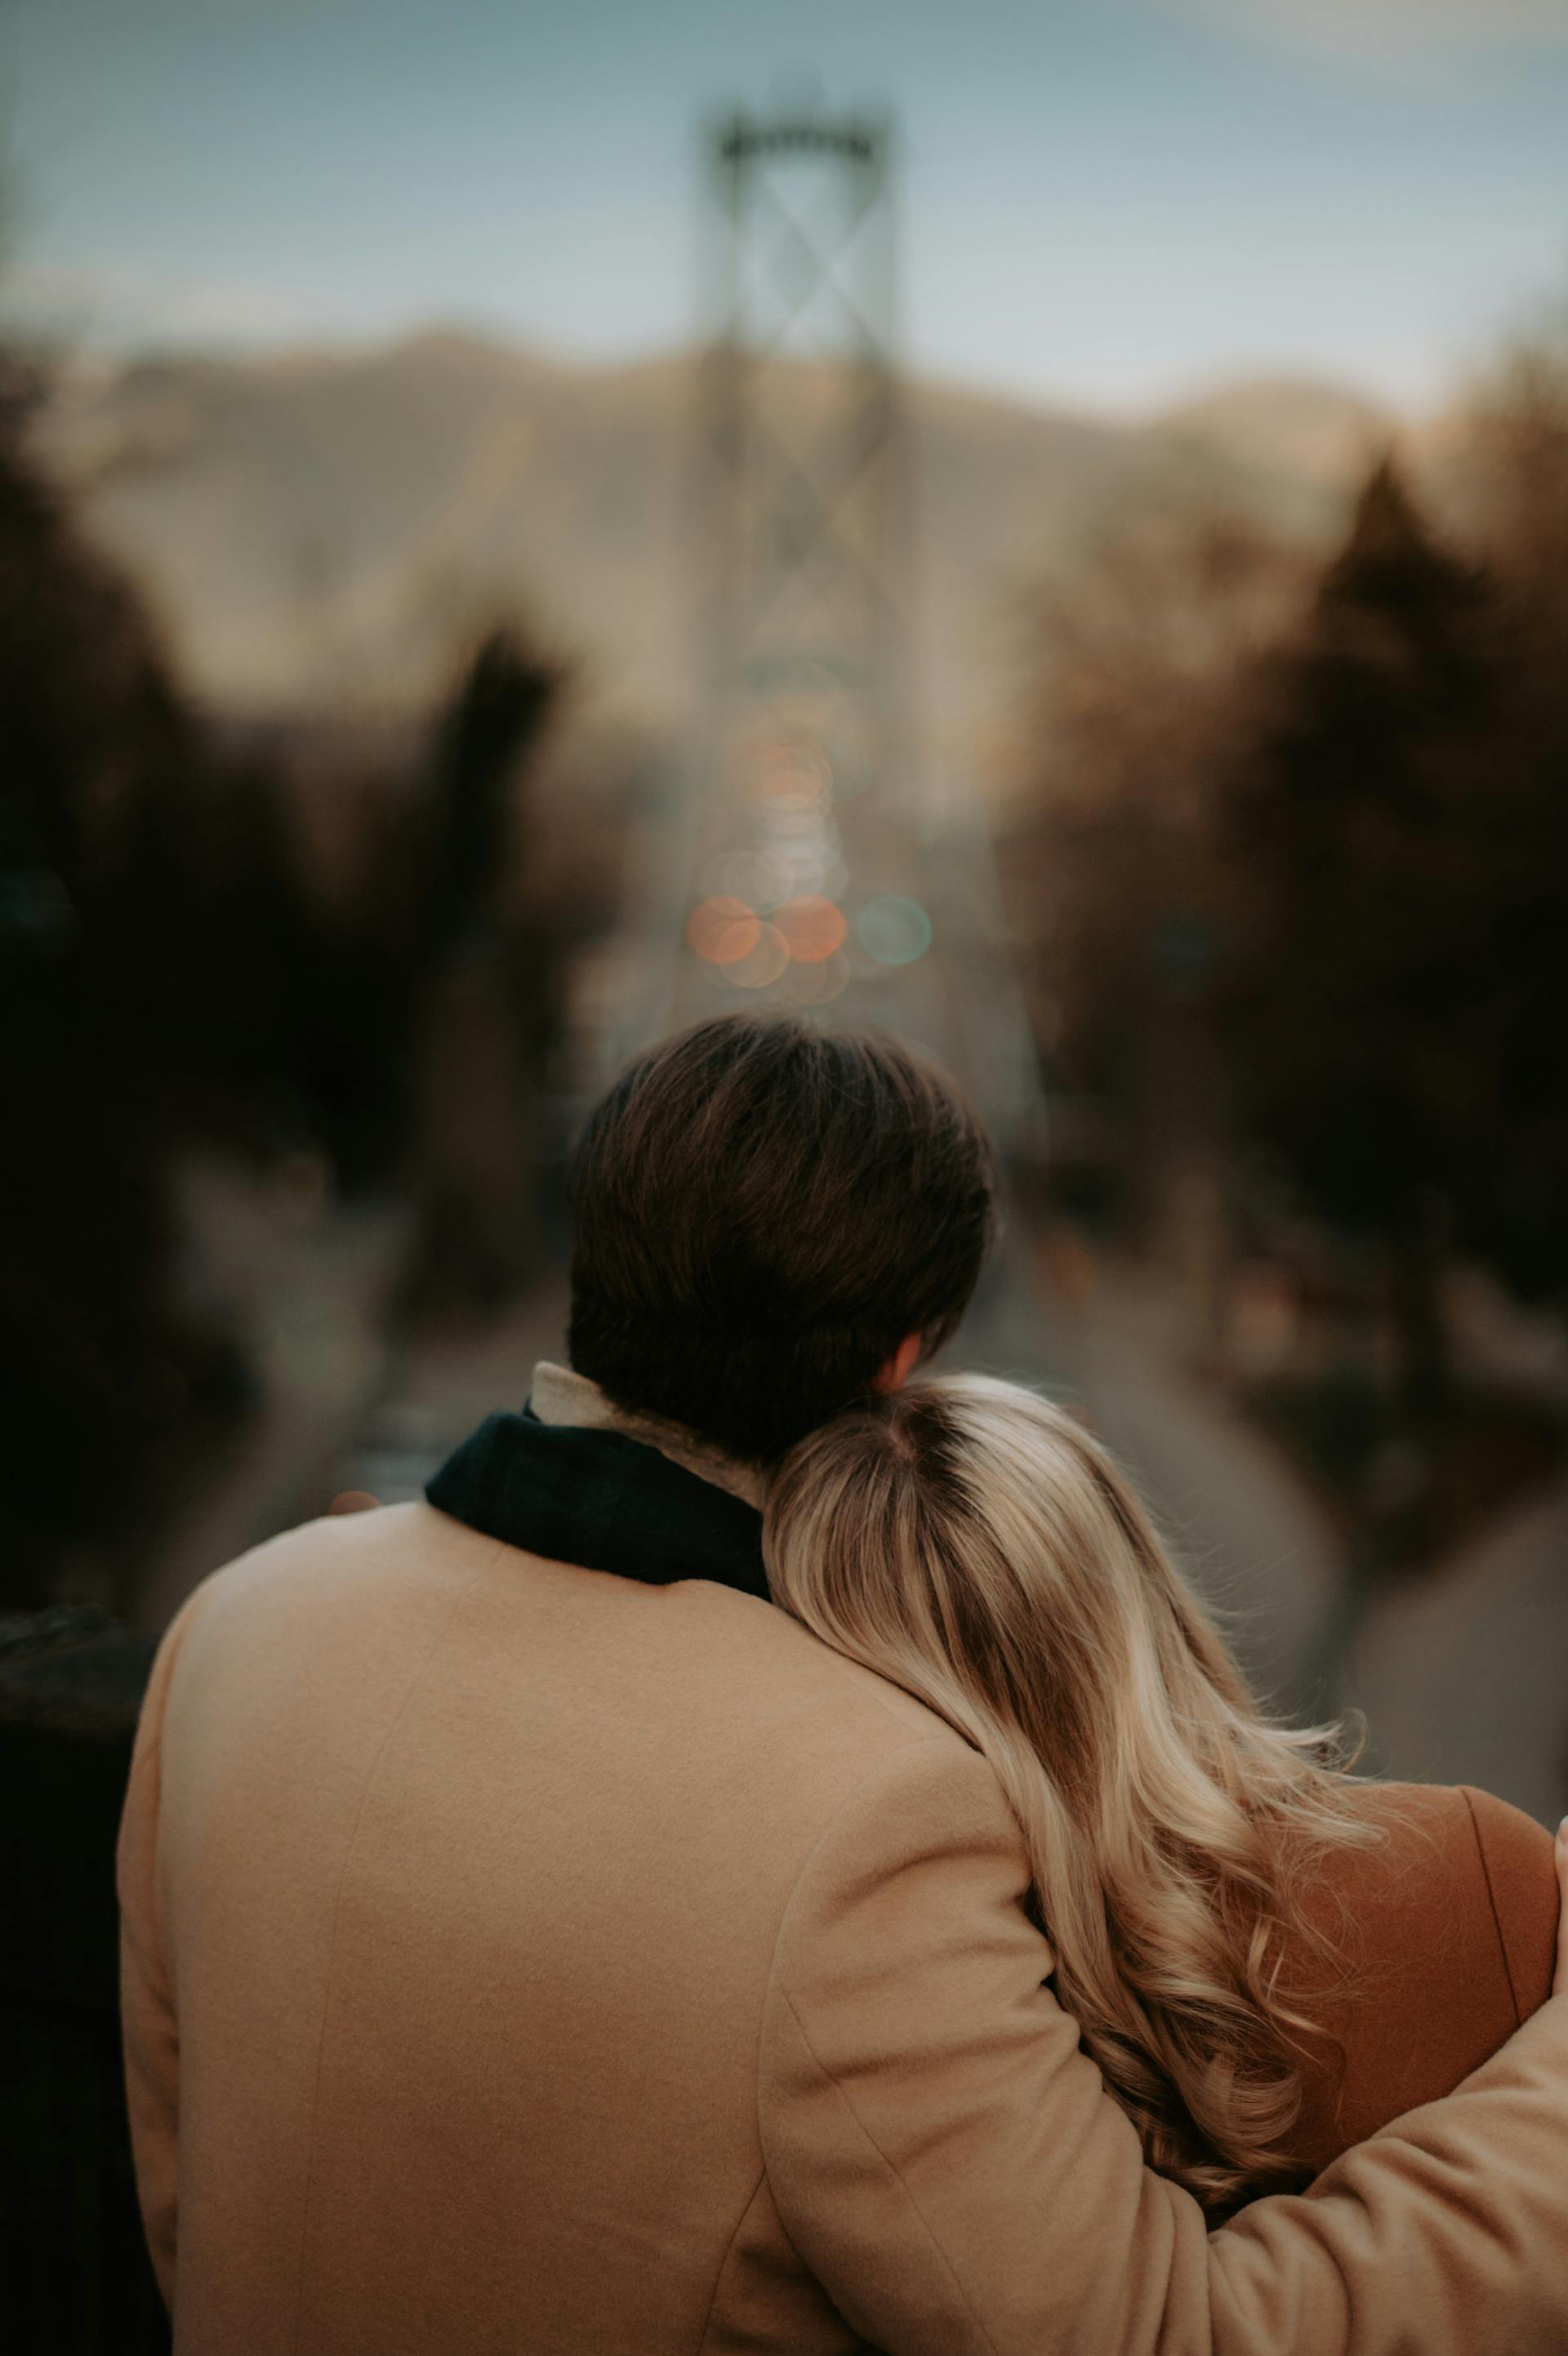 A man embracing a woman against a blurred cityscape | Source: Pexels